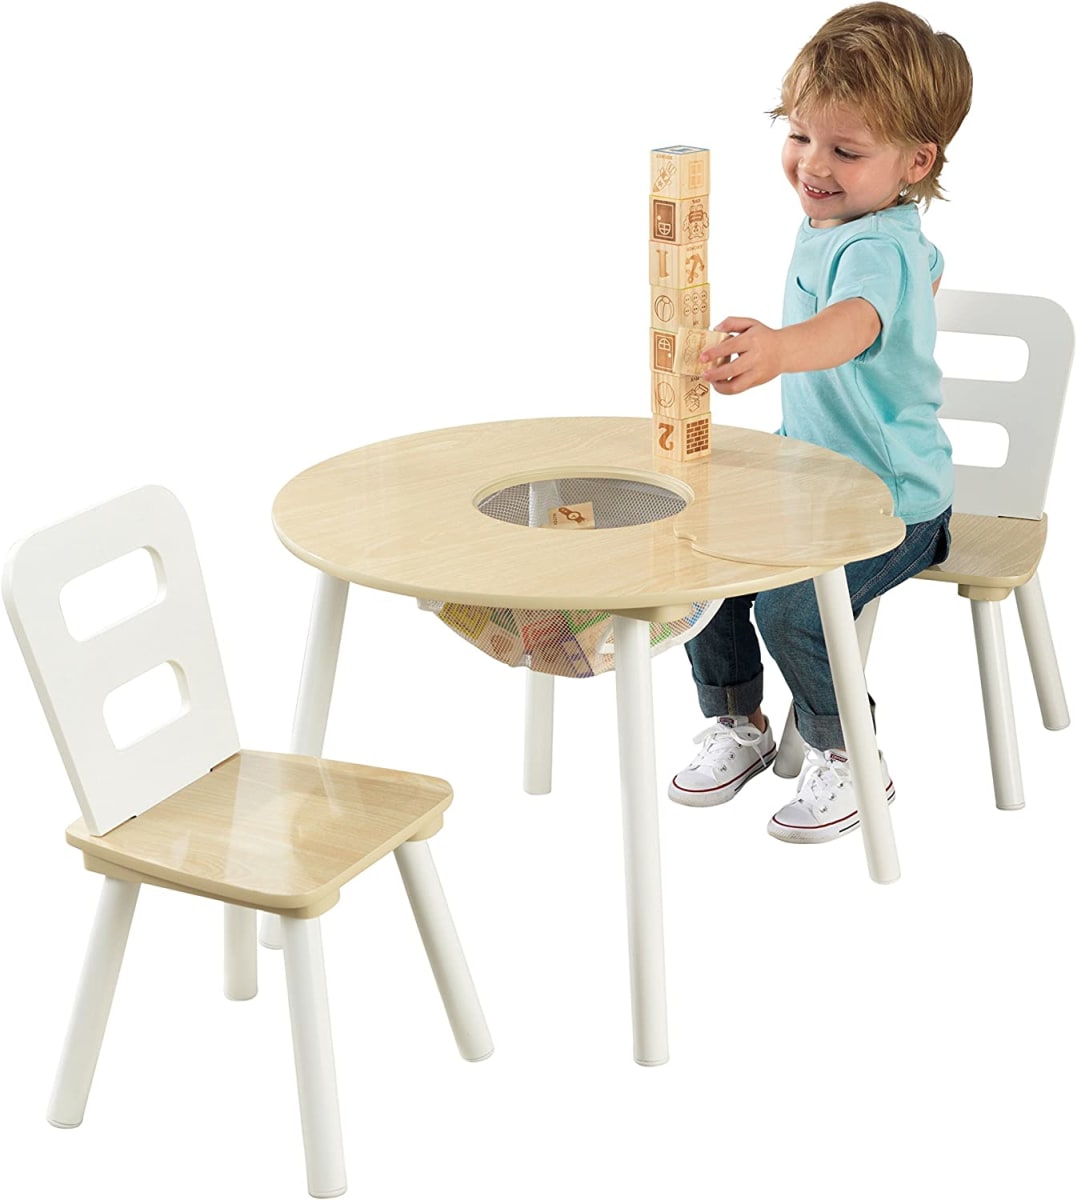 Wooden Round Table & 2 Chair Set with Center Mesh Storage - Natural & White, Gift for Ages 3-6 23.5 x 23.5 x 17.3